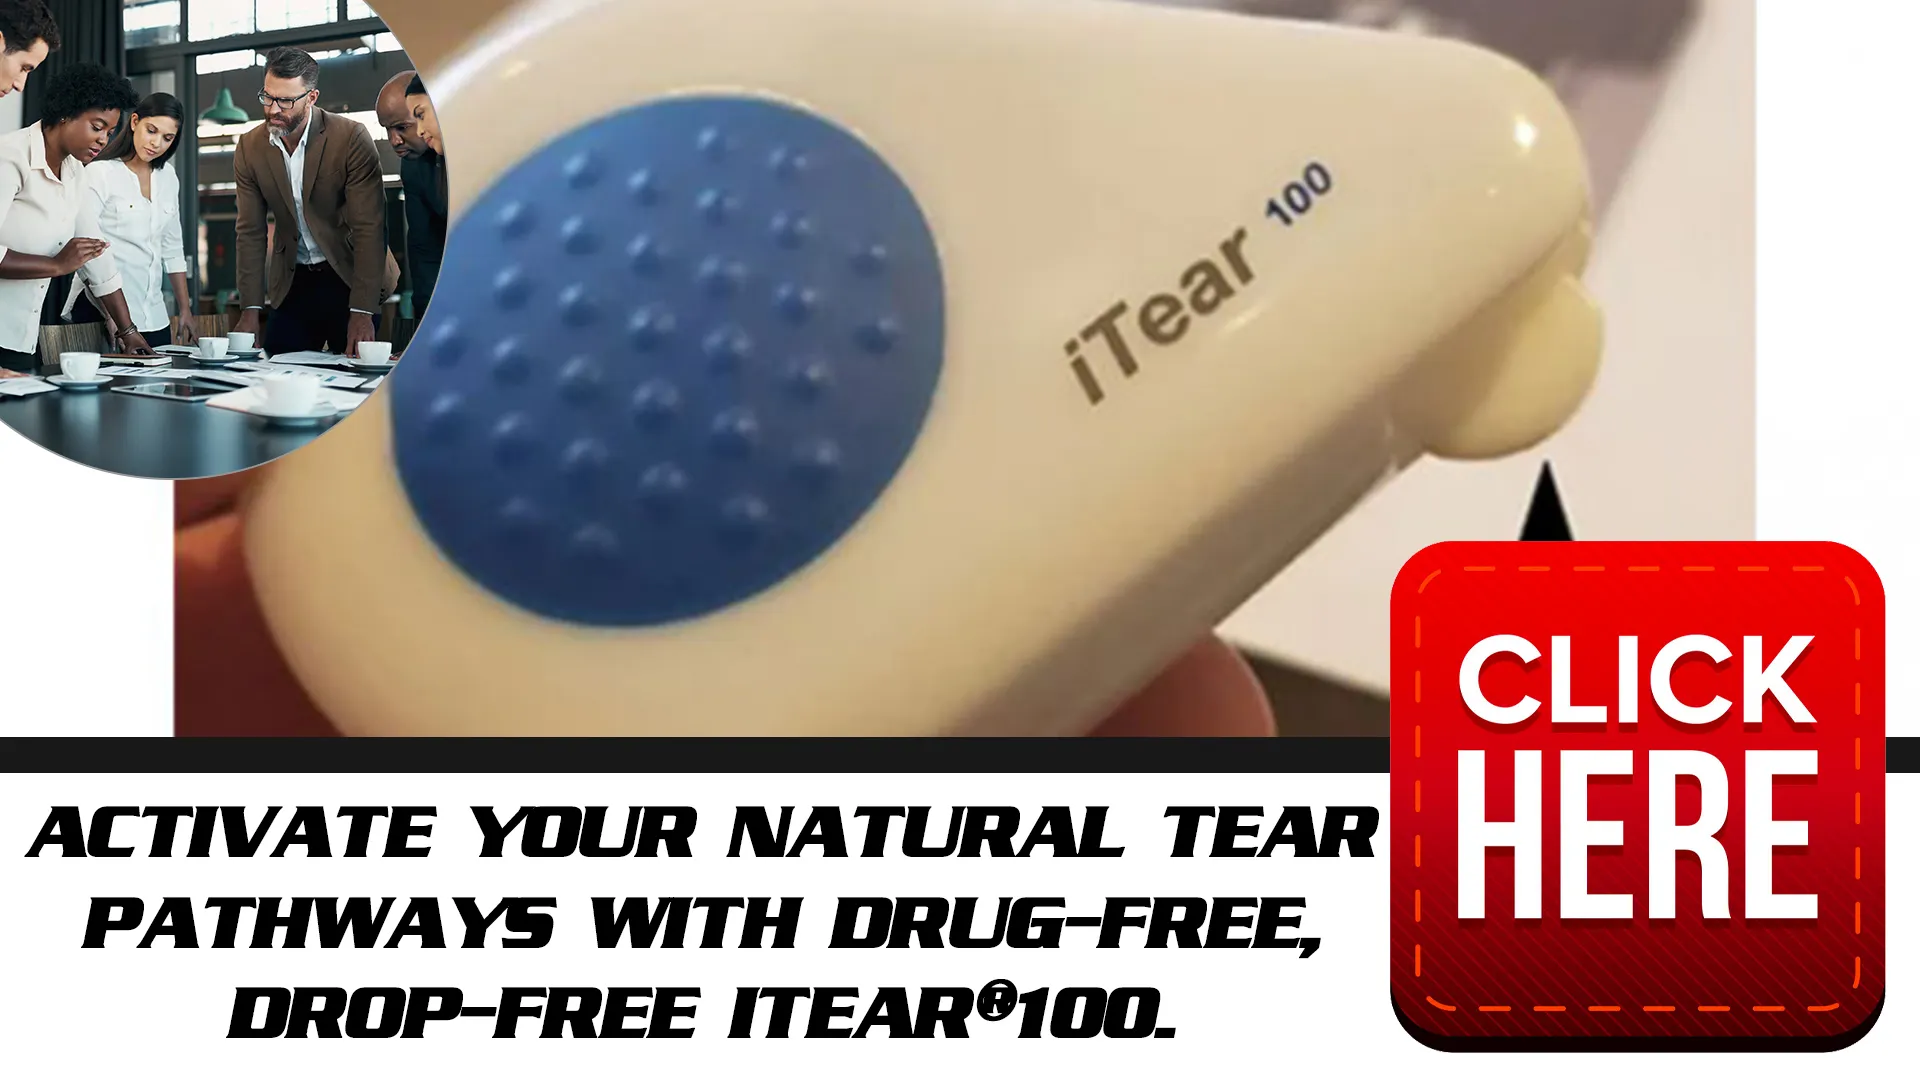 Taking Action on Dry Eye With iTEAR100